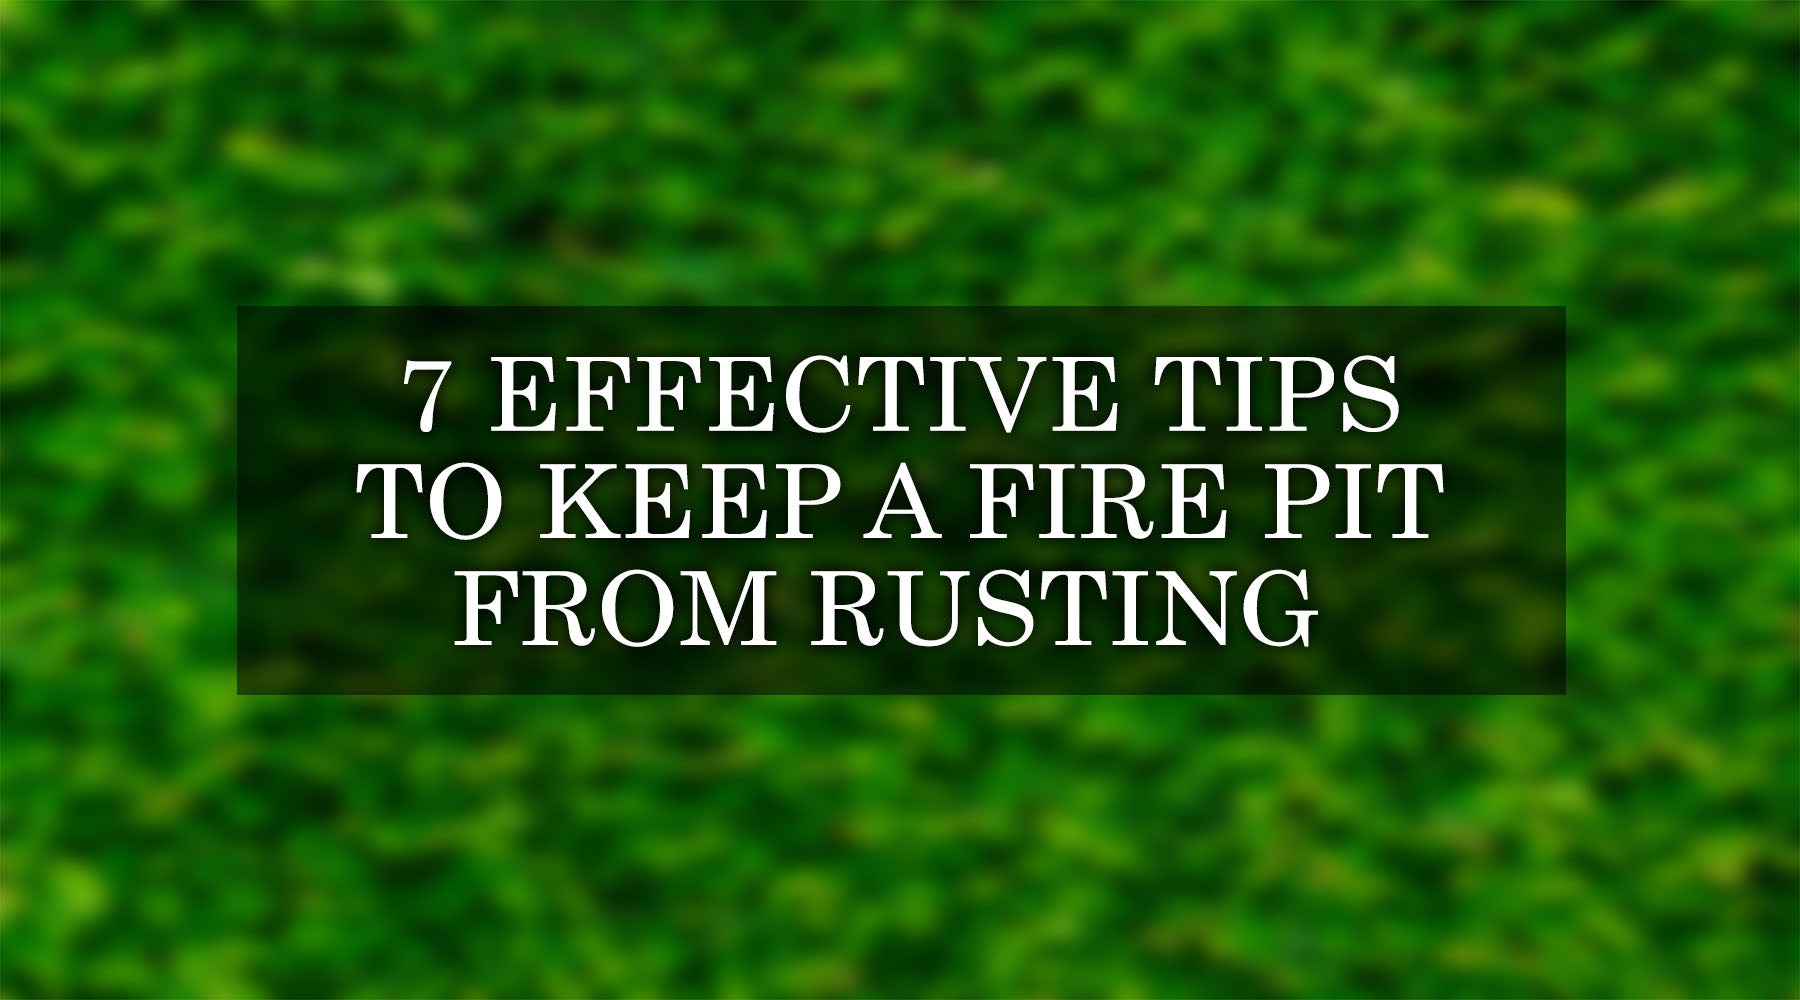 7 Effective Tips to Keep a Fire Pit From Rusting 